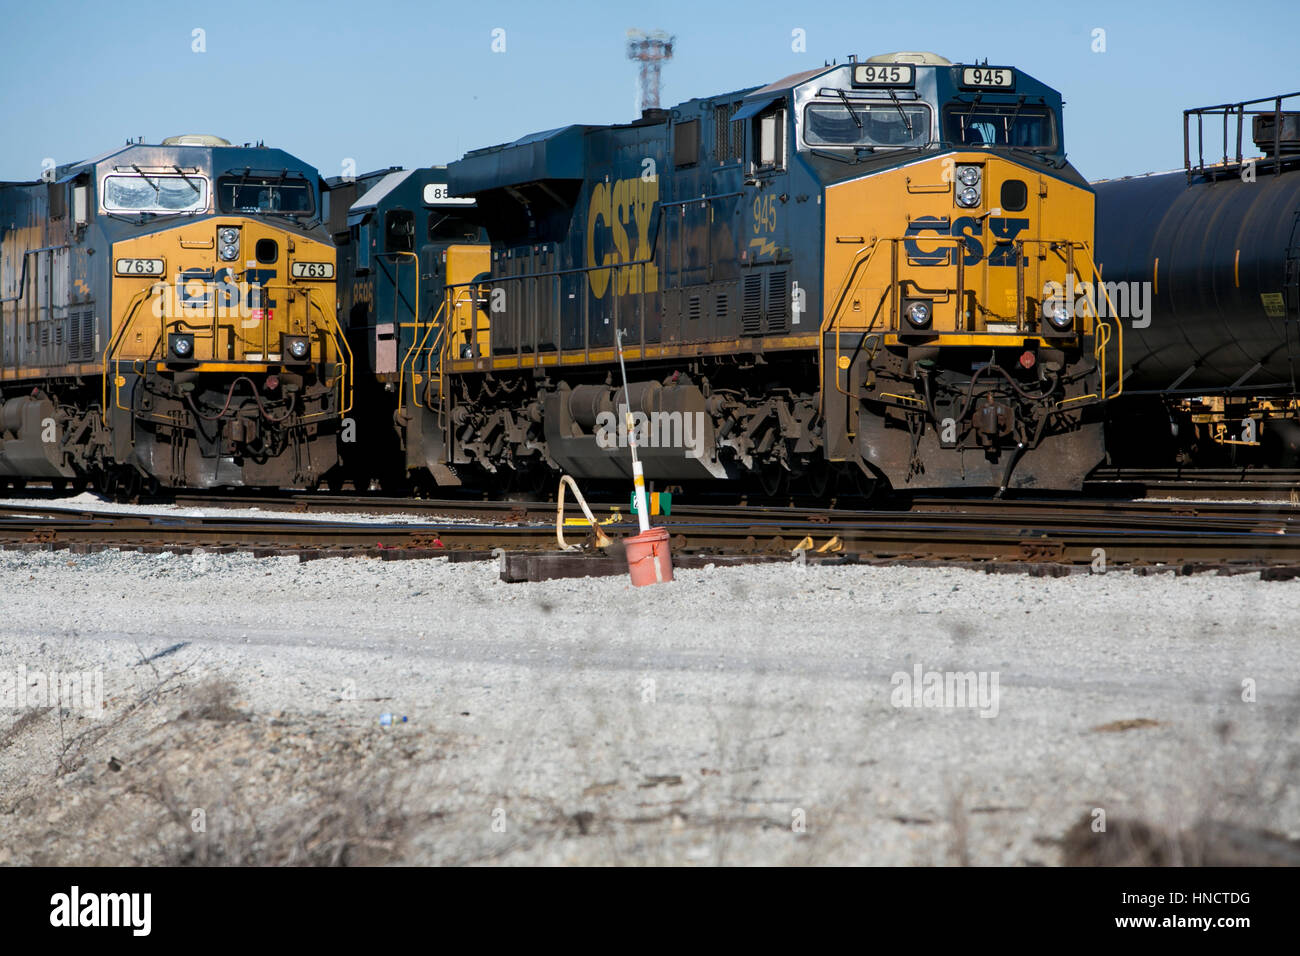 CSX Locomotives and train cars on a railroad siding in Nashville, Tennessee on February 4, 2017. Stock Photo